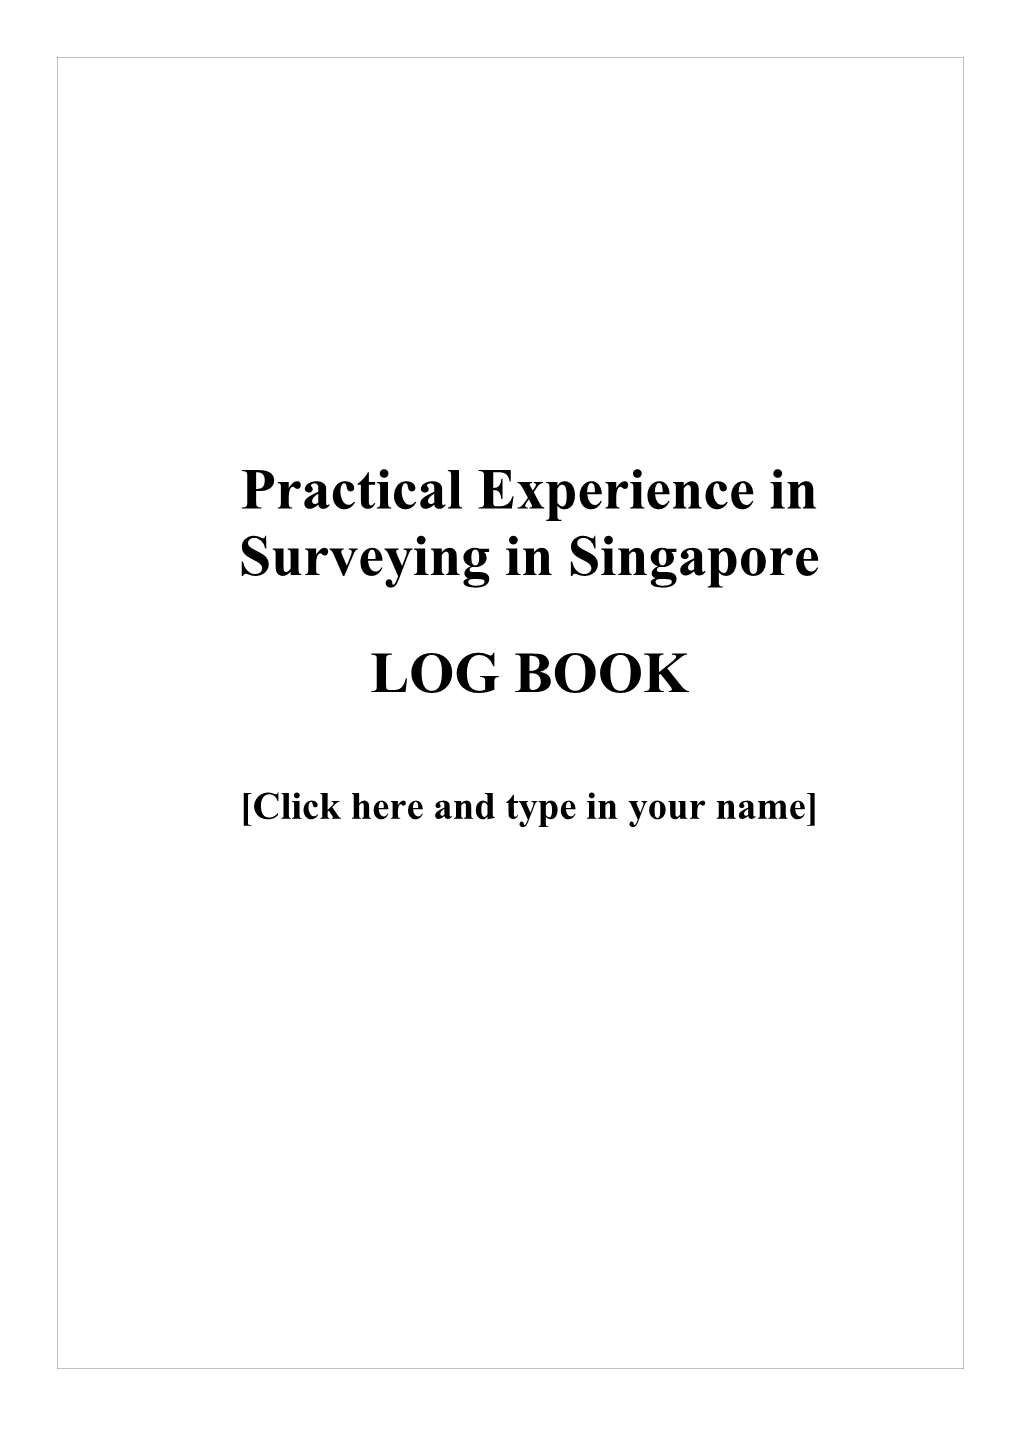 Practical Experience in Surveying in Singapore